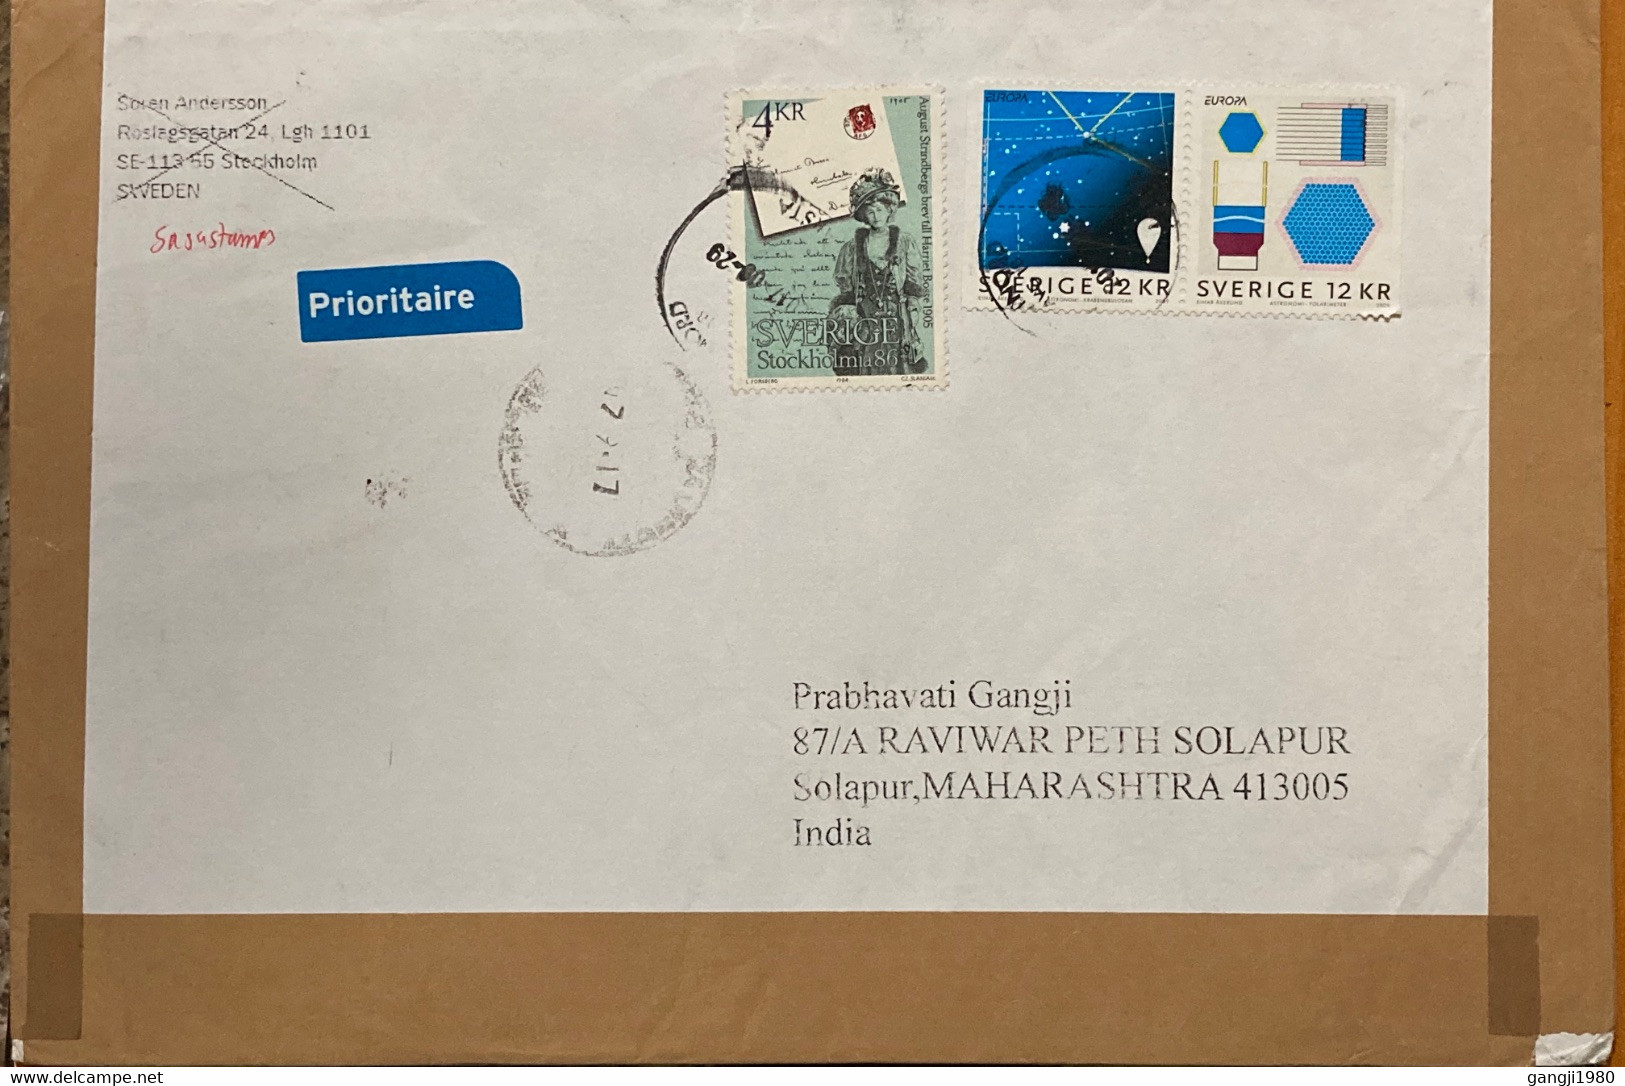 SWEDEN 2009, EUROPA SE-TENENT ,COVER ON STAMP ! STOCKHOLMIA 86 ,3 STAMP USED COVER TO INDIA - Lettres & Documents